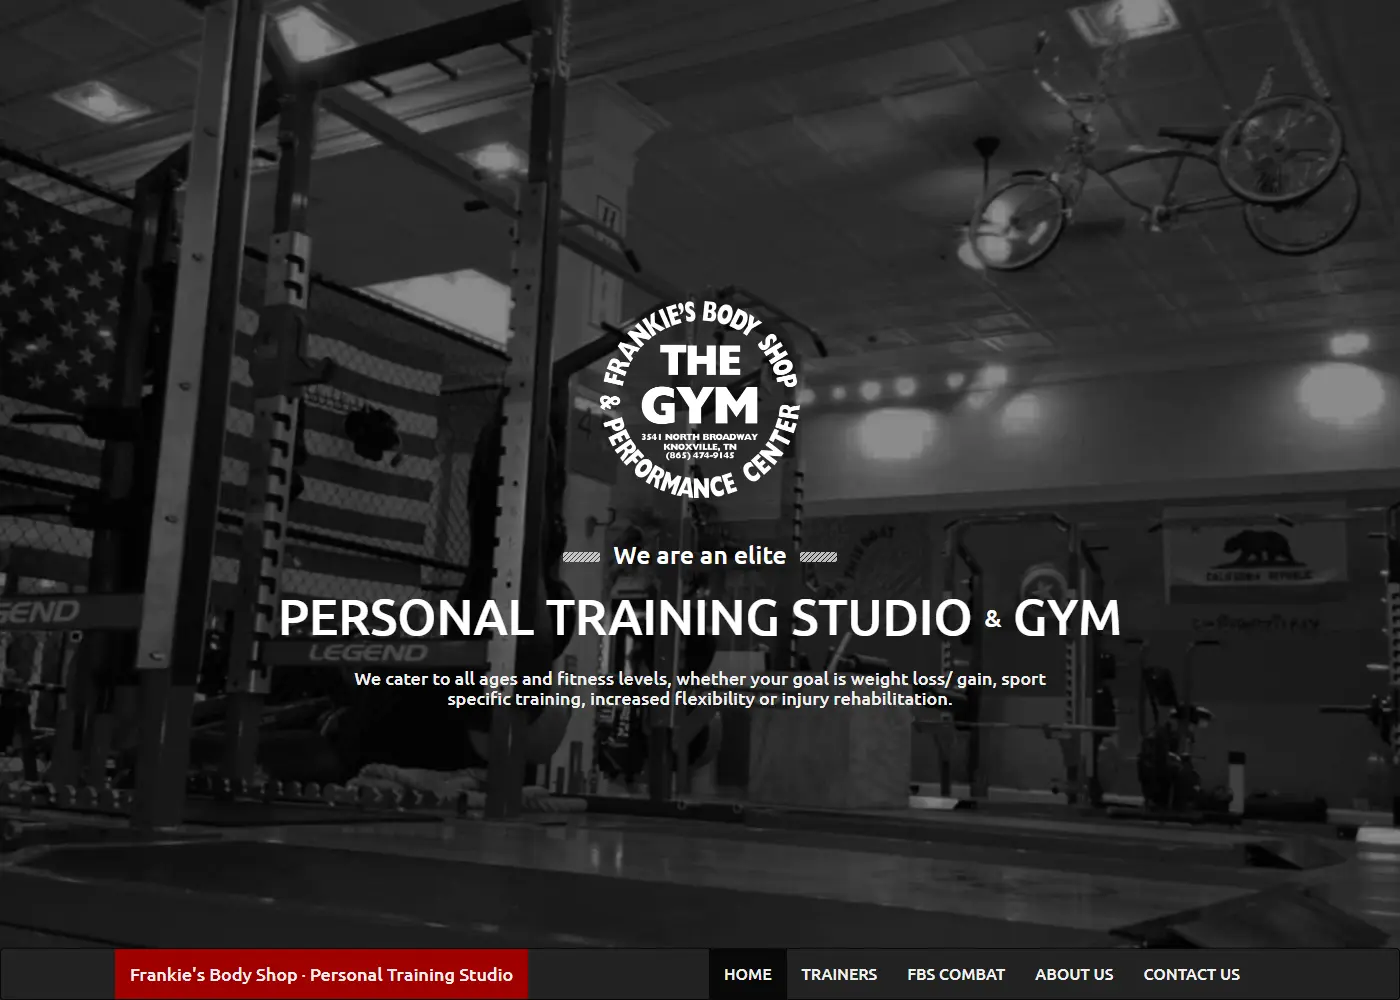 Homepage for Frankie's Body Shop showing gym photo and logo.